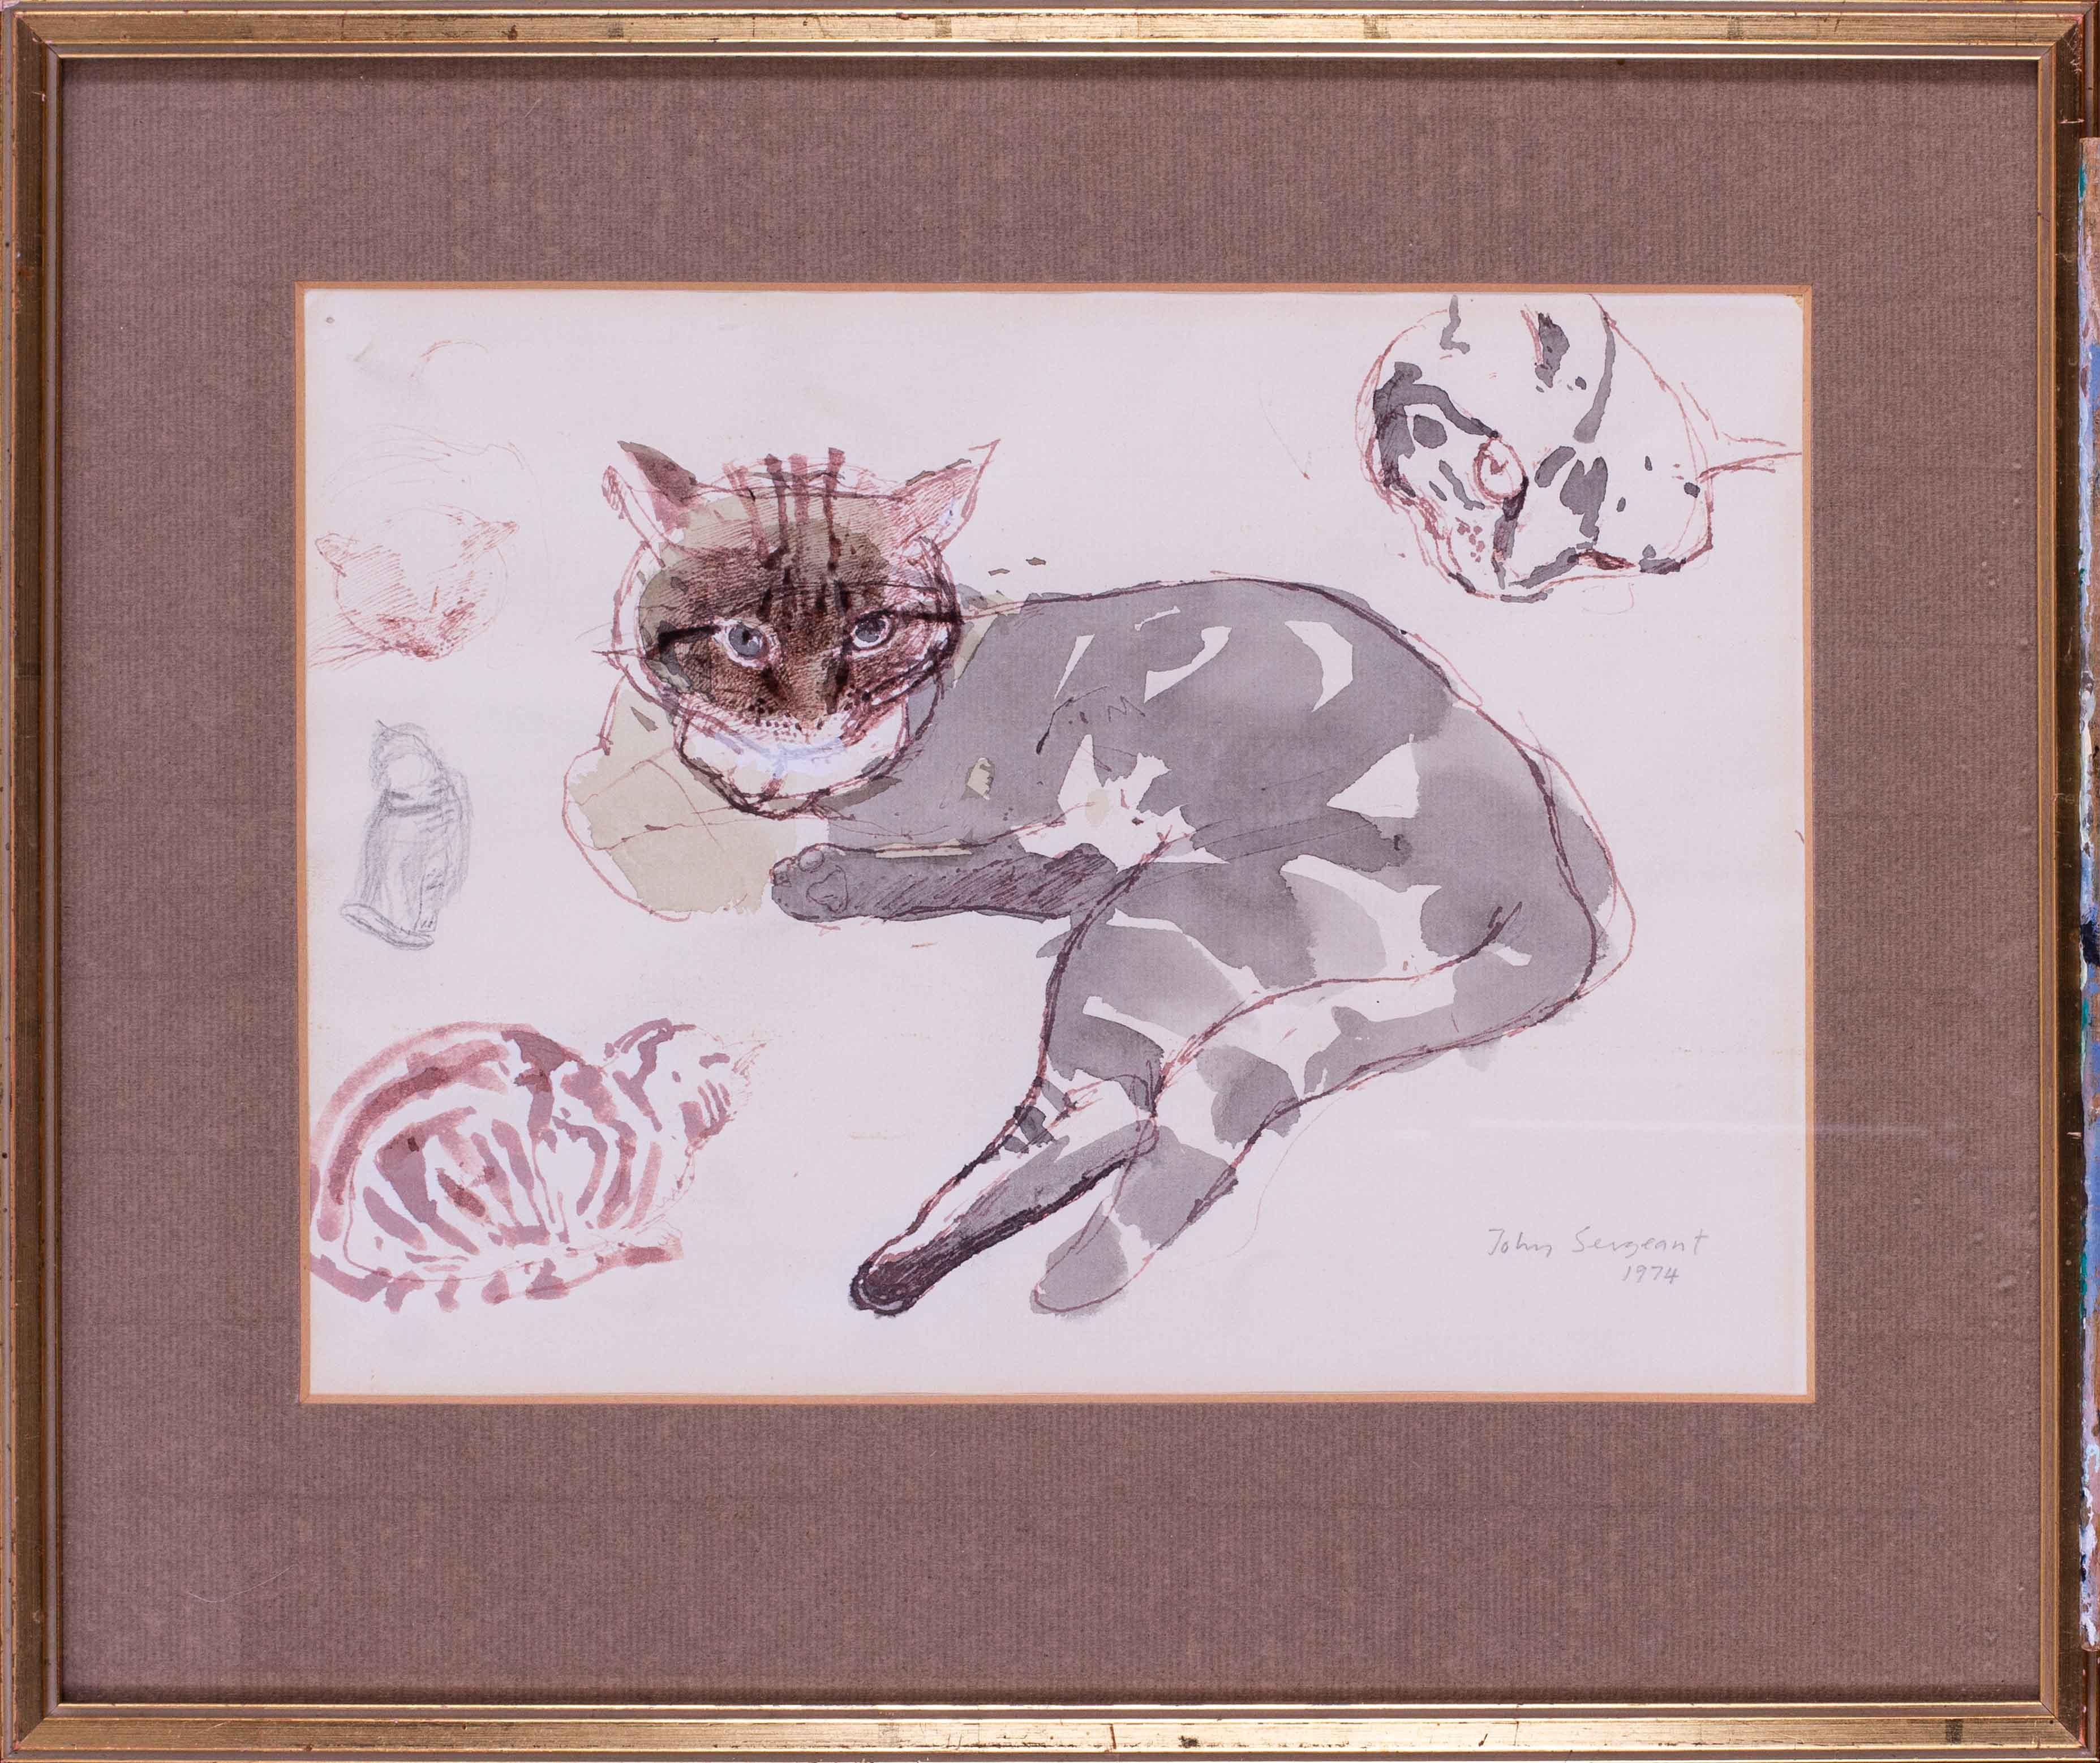 John Sargeant (British, 1937 – 2010)
Studies of a tabby cat
Mixed media
Signed and dated ‘John Sargeant 1974 (lower right)
8.7/8 x 12in. (22.6 x 30.5 cm.)
